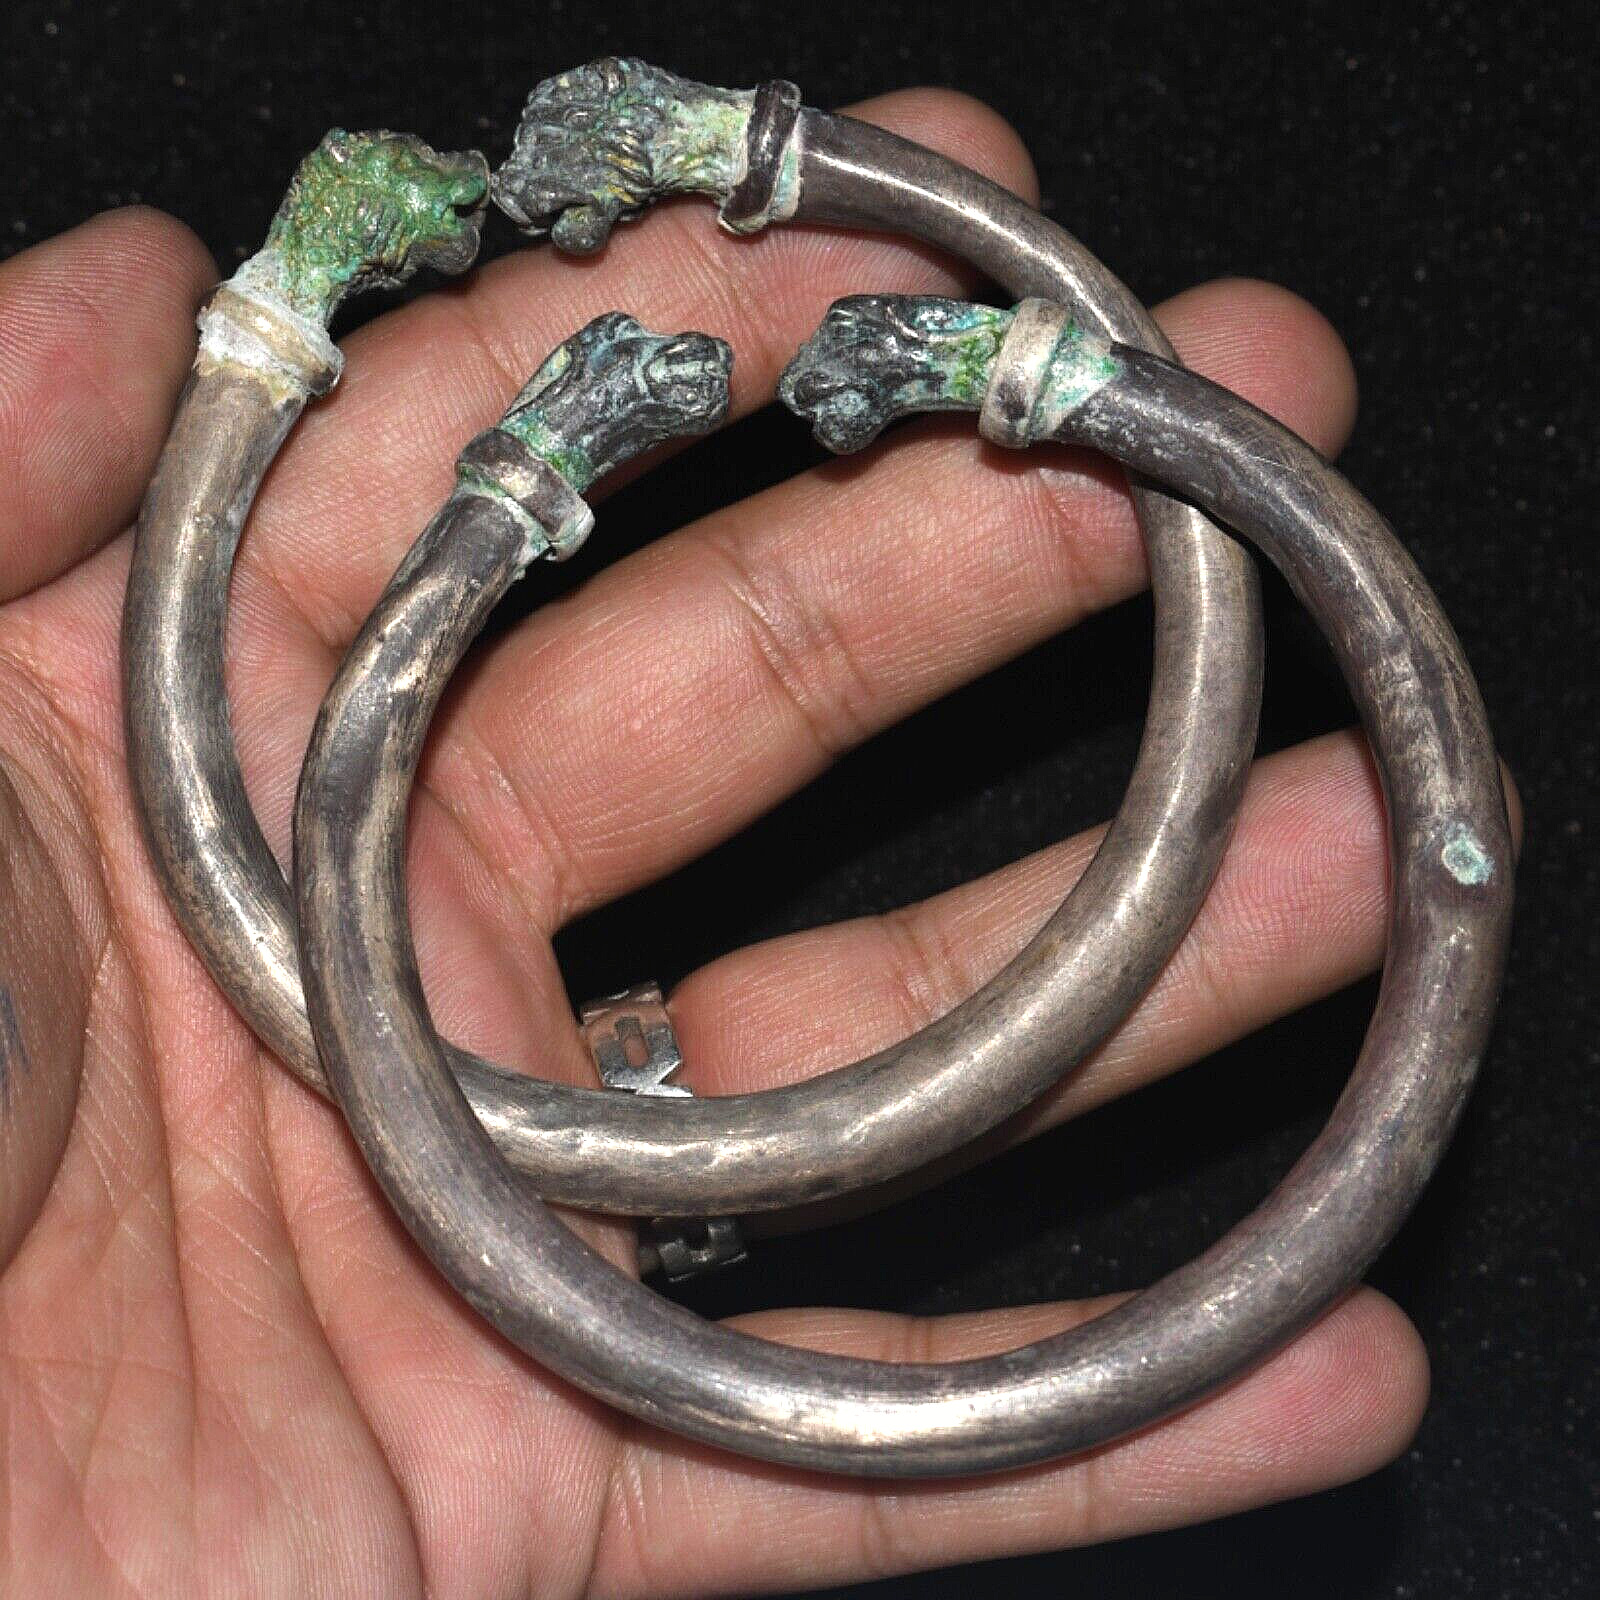 Large Ancient Greek Bactrian Silver Bracelet with Lion Protomes Ca. 2500-1000 BC